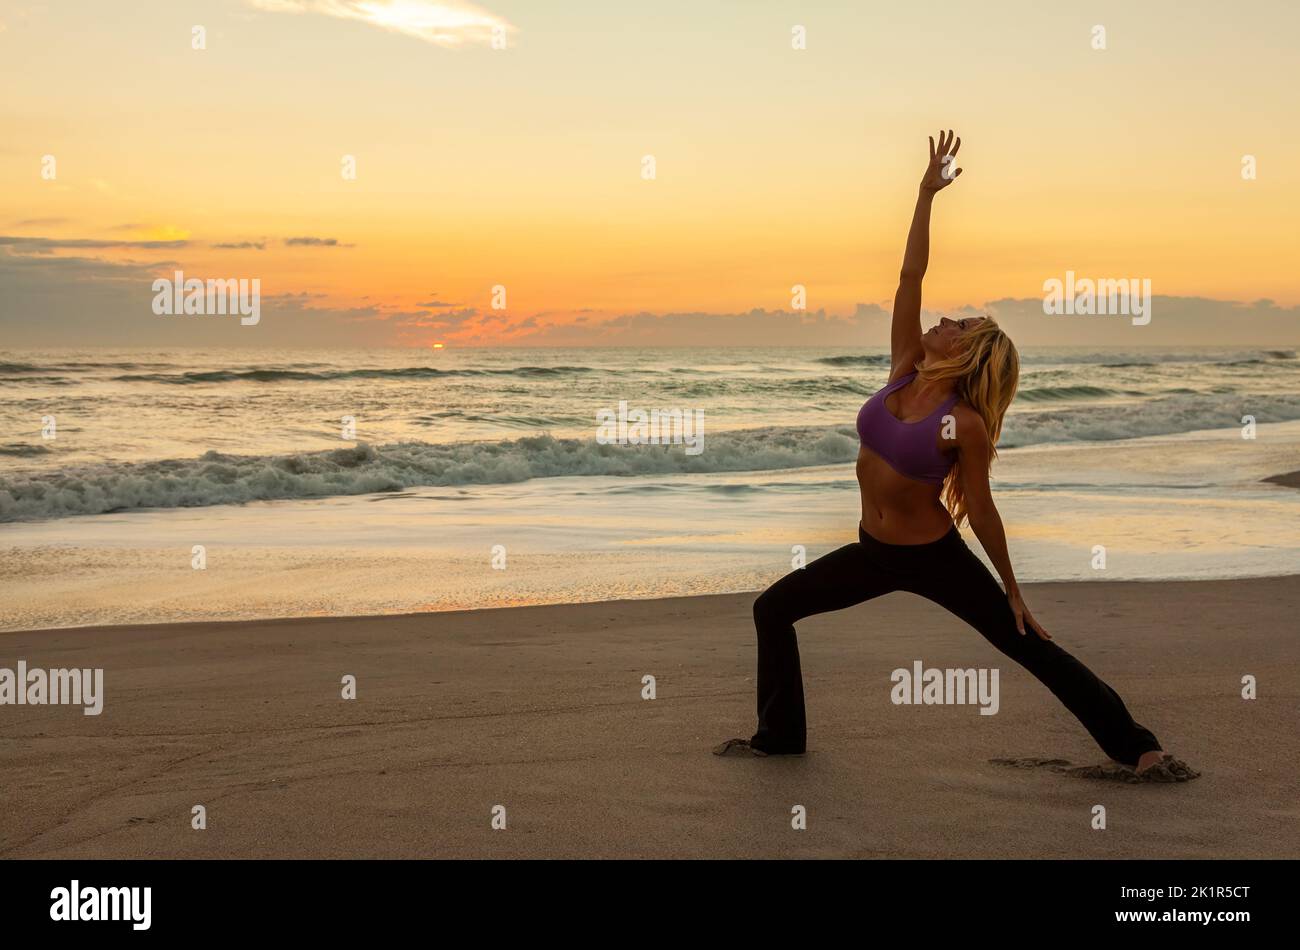 Young woman girl female in a warrior position practicing yoga on a beach at sunrise or sunset Stock Photo